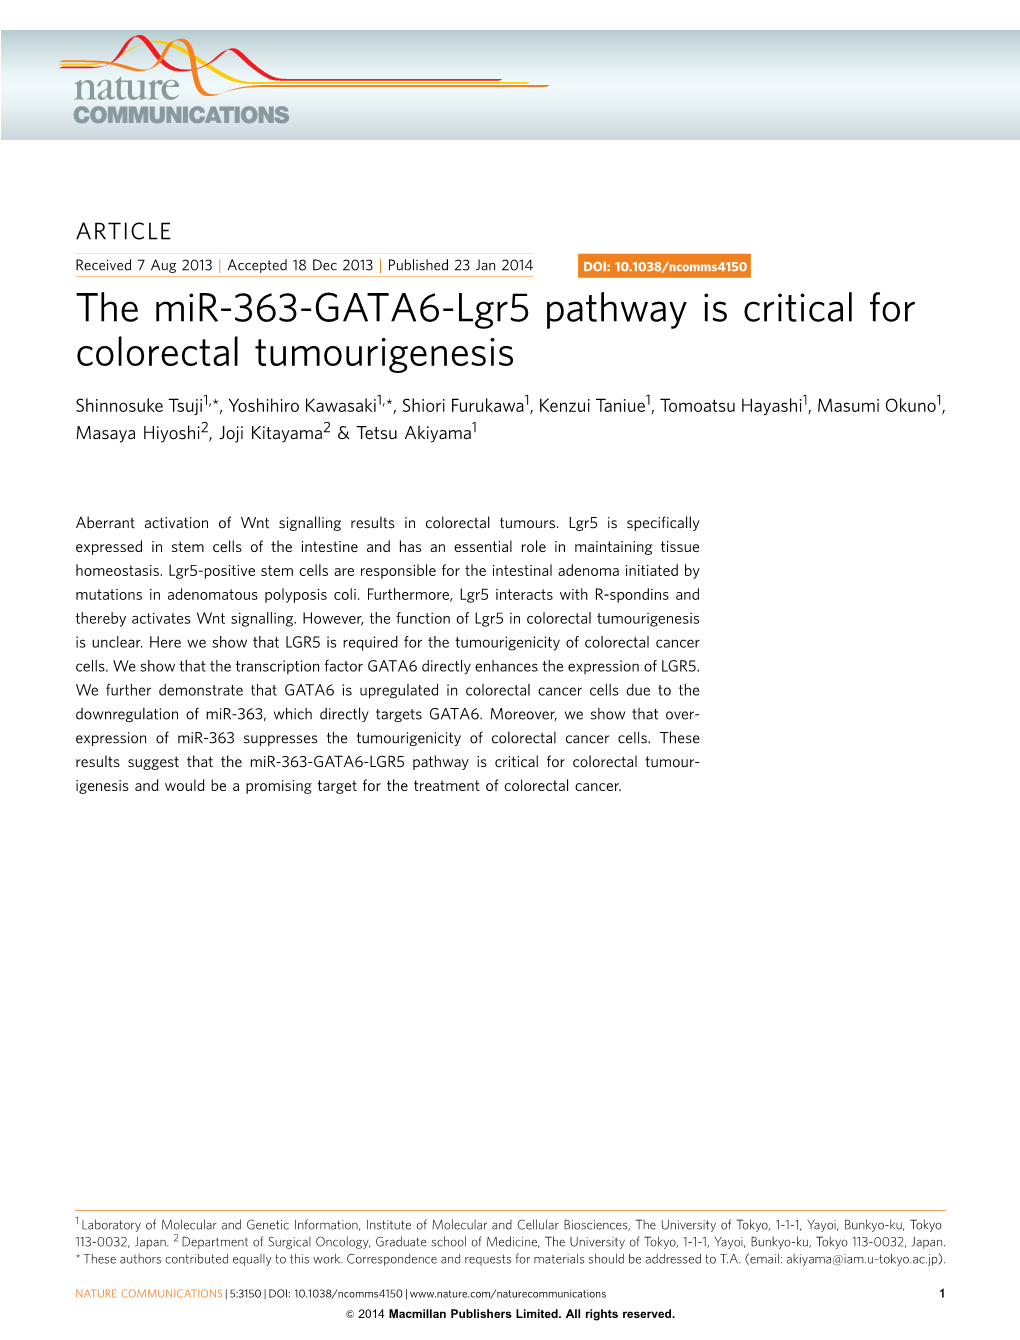 The Mir-363-GATA6-Lgr5 Pathway Is Critical for Colorectal Tumourigenesis